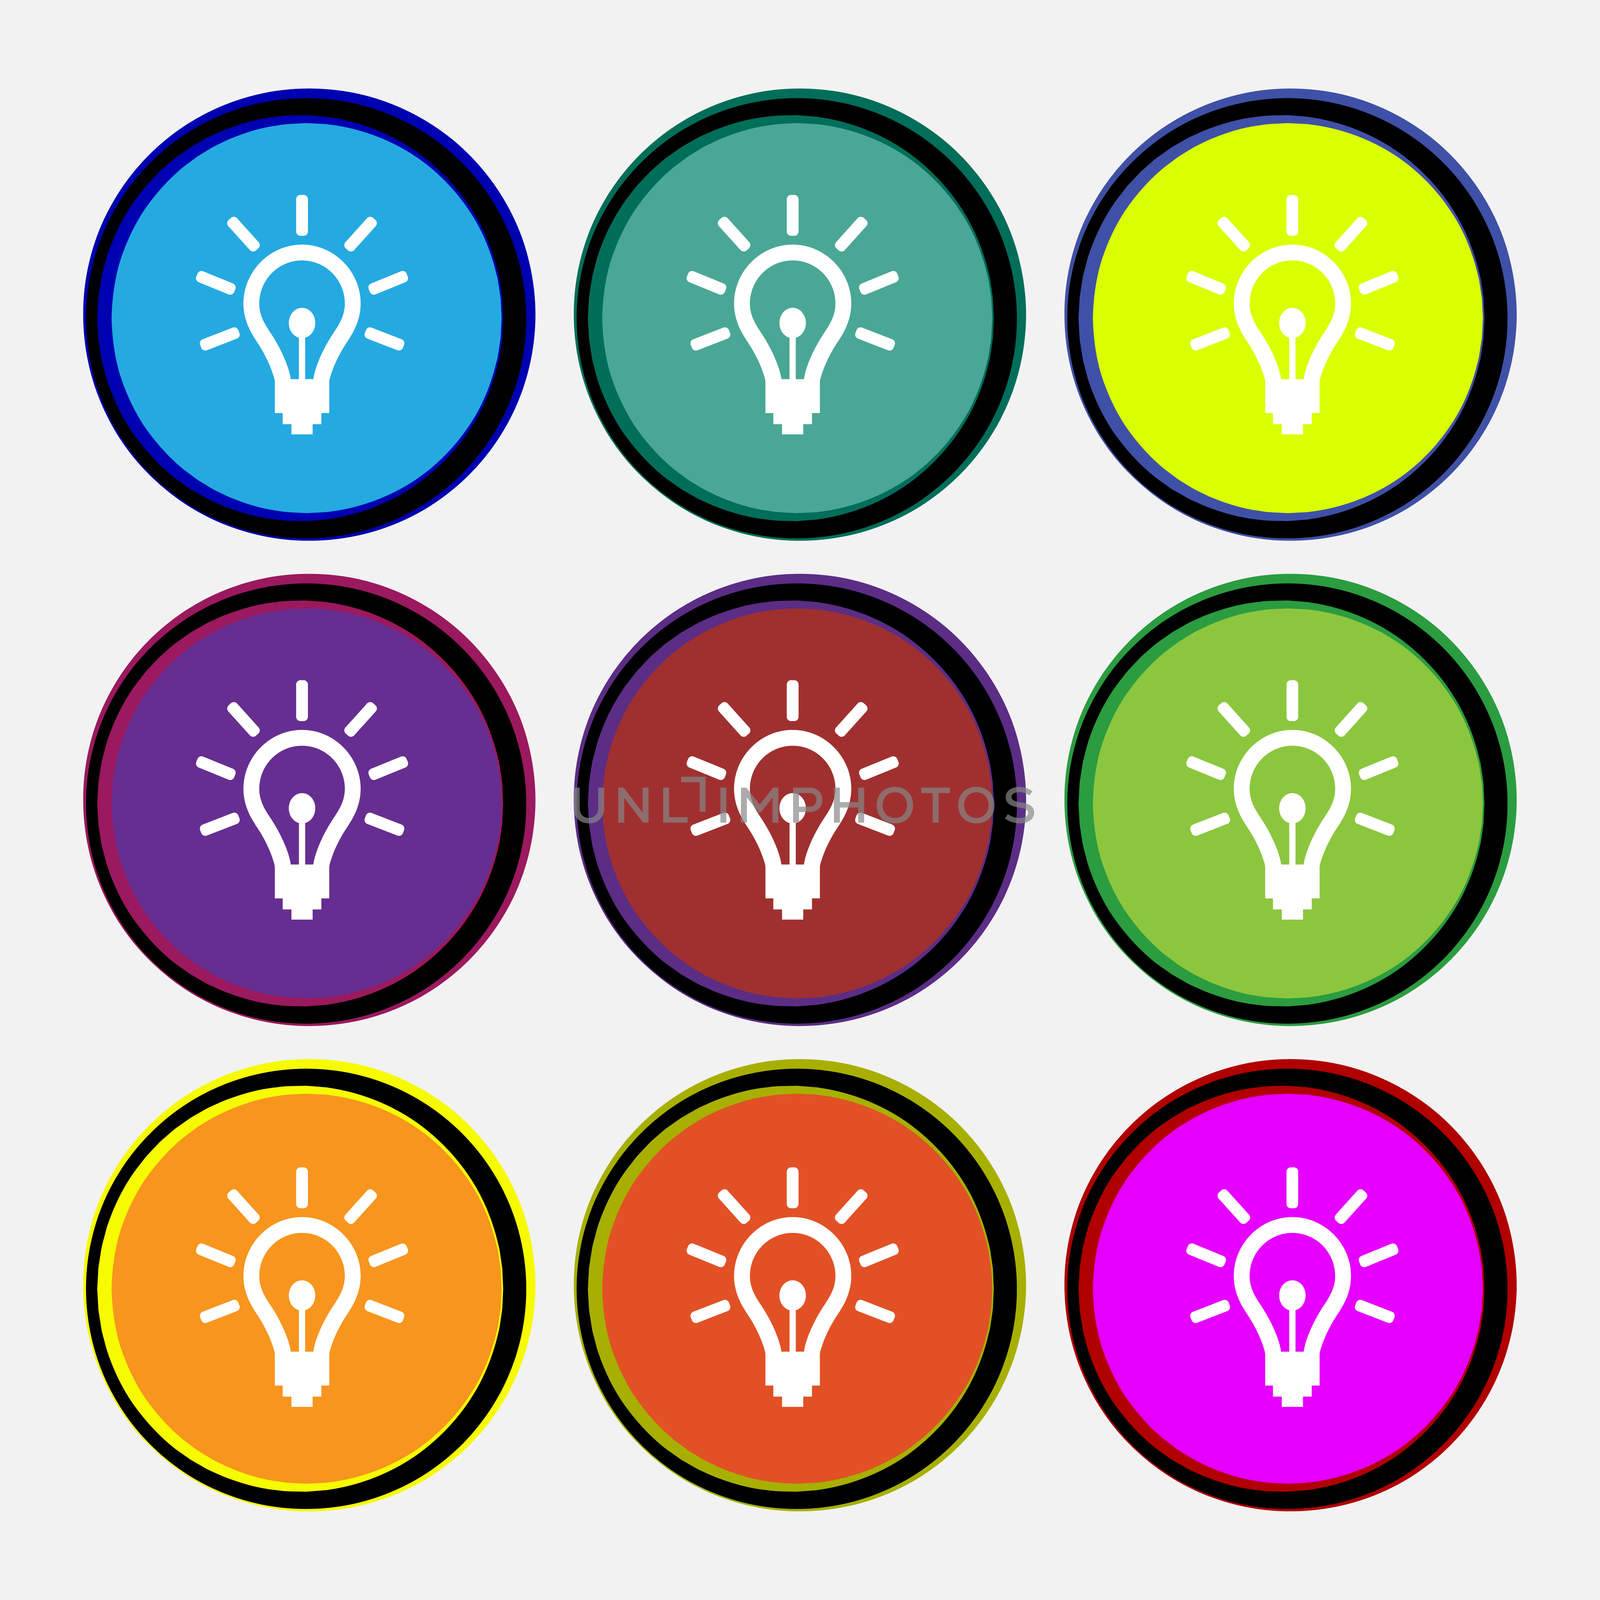 Light bulb icon sign. Nine multi colored round buttons. illustration